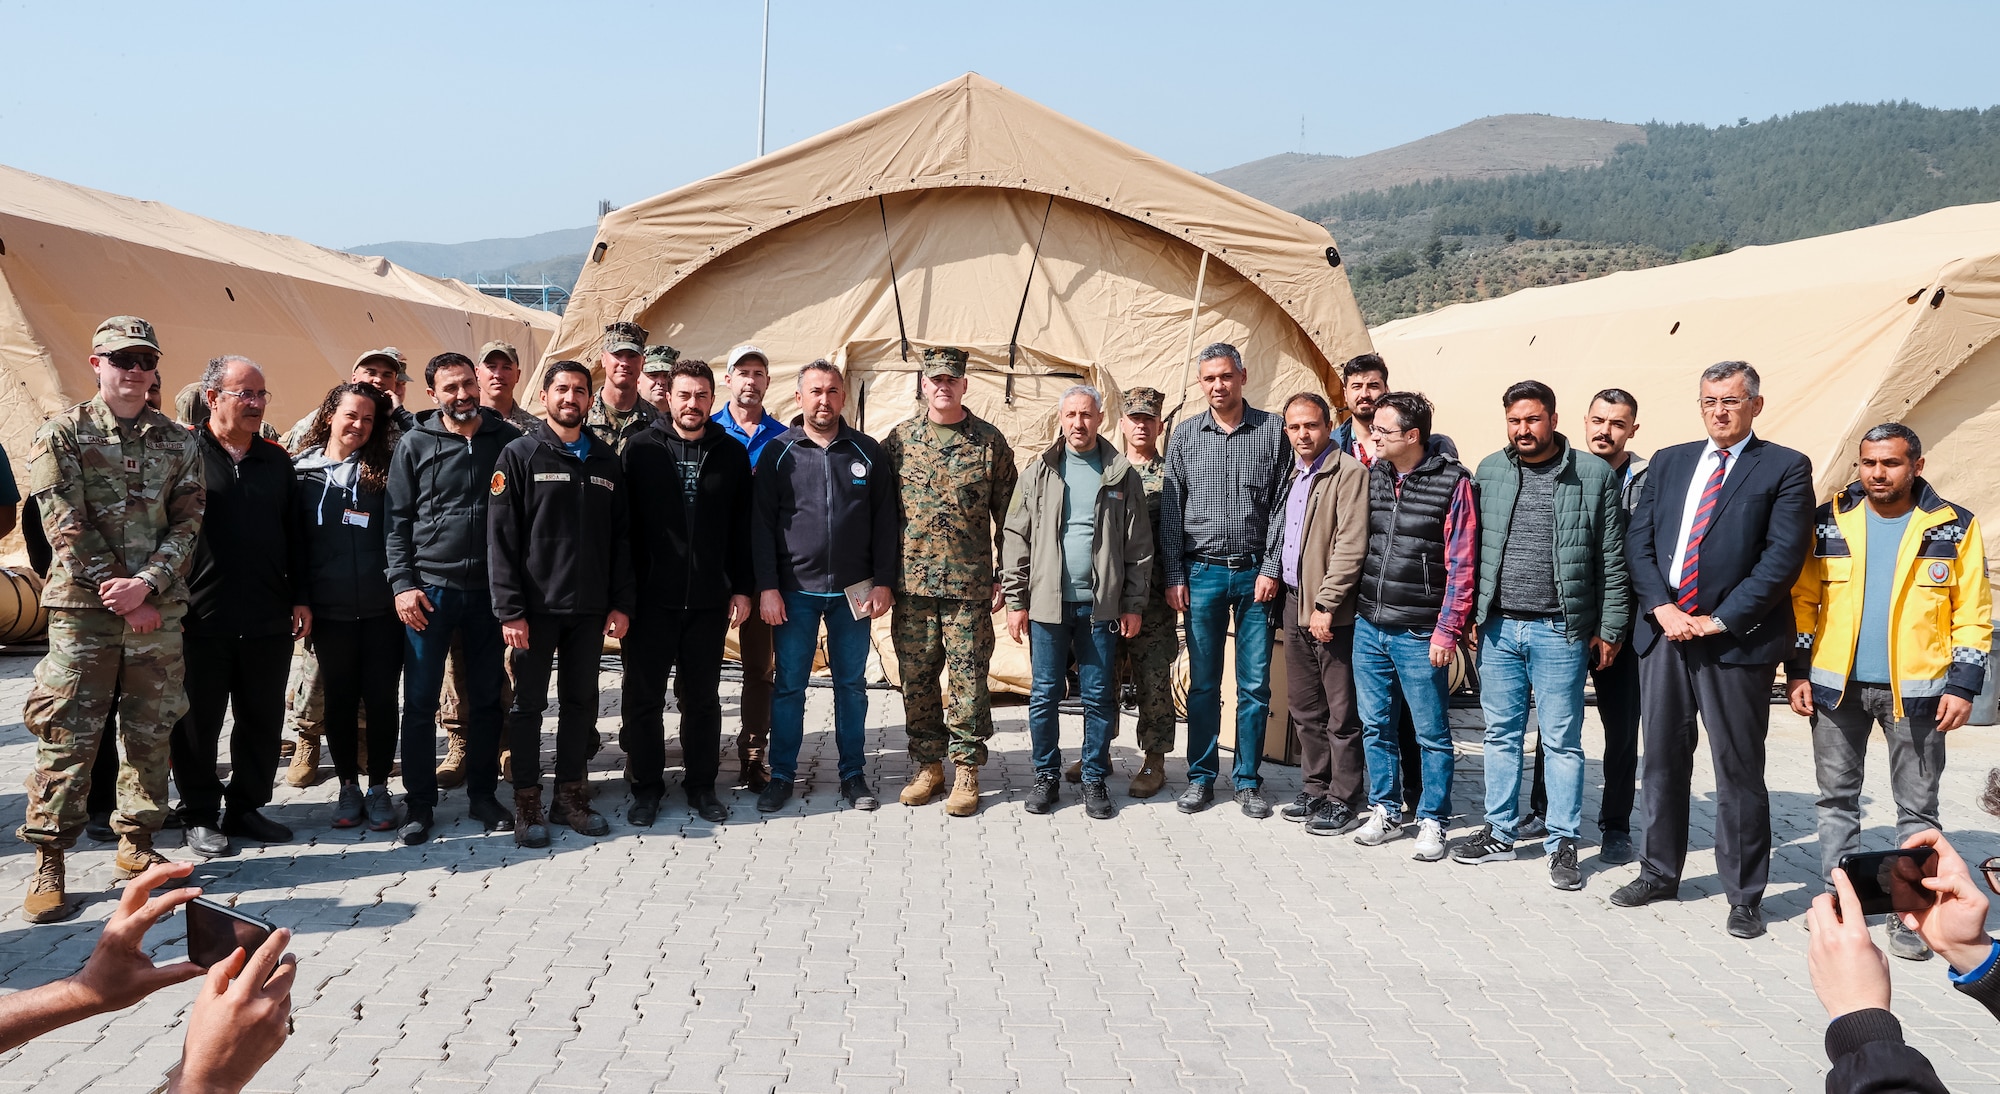 Brigadier Gen. Andrew T. Priddy, commanding general, Task Force 61/2, leadership from Task Force 61/2, and members of the Turkish Ministry of Health pose for a photo at Antakya, Türkiye, March 2, 2023. At the request of the Turkish government, U.S. military personnel assigned to Task Force 61/2 and 39th Air Base Wing were tasked with building a field hospital for the citizens who were affected by the Feb. 6 earthquakes. Upon completion of their efforts on March 2, 2023, leaders from Task Force 61/2 (TF 61/2), and 39th Air Base Wing conducted a final walk-through before the Turkish Ministry of Health began operations at the field hospital.